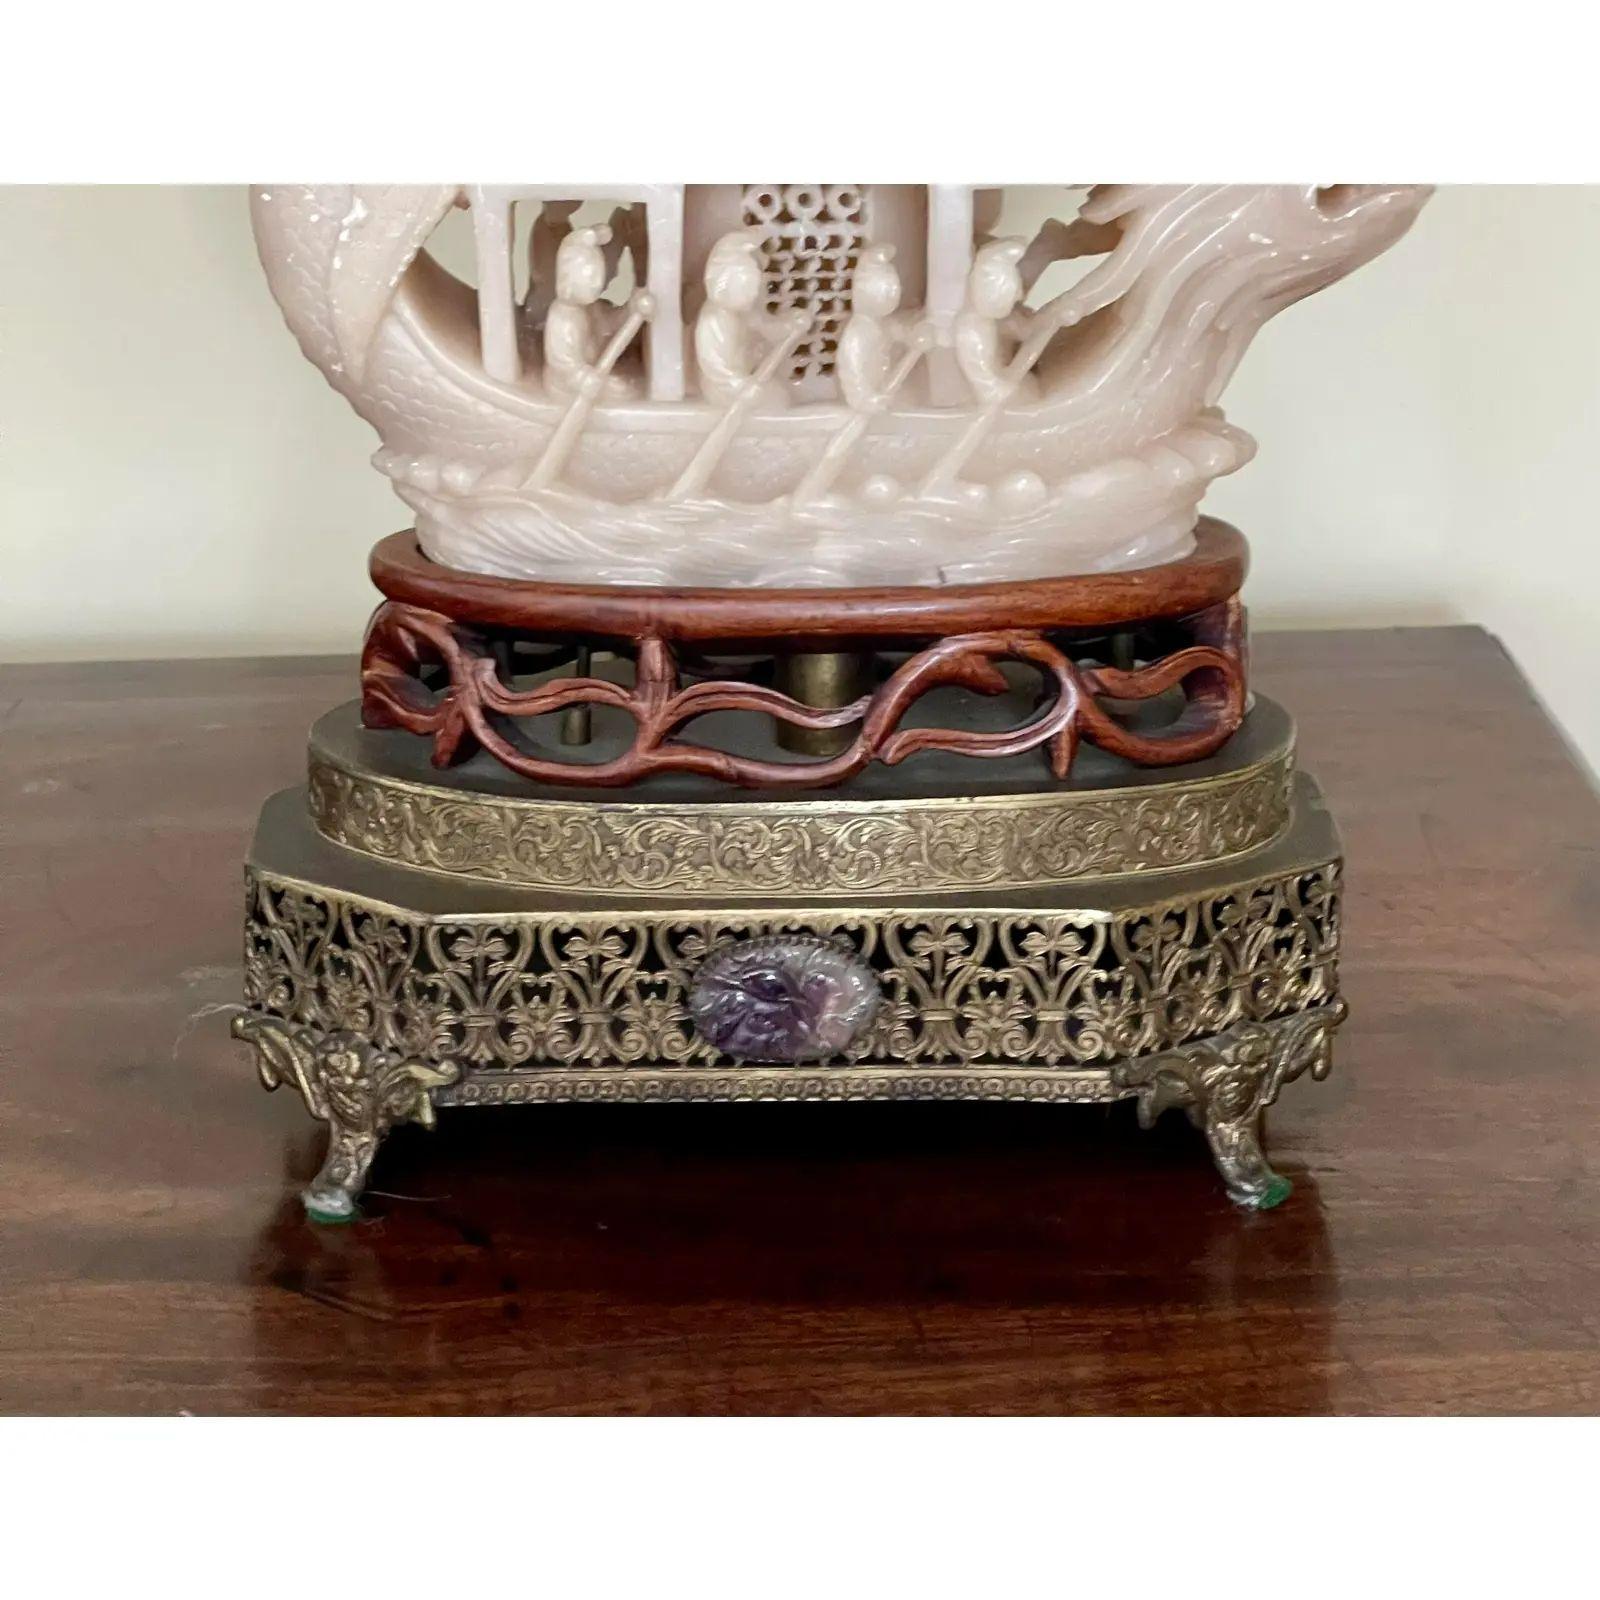 Antique Soapstone ship sculpture Now a designer table lamp. It is beautifully carve and features figures rowing a large ship. It includes the custom shade illustrated as well as a beaded pull.

Additional information: 
Materials: Lights, Silk,